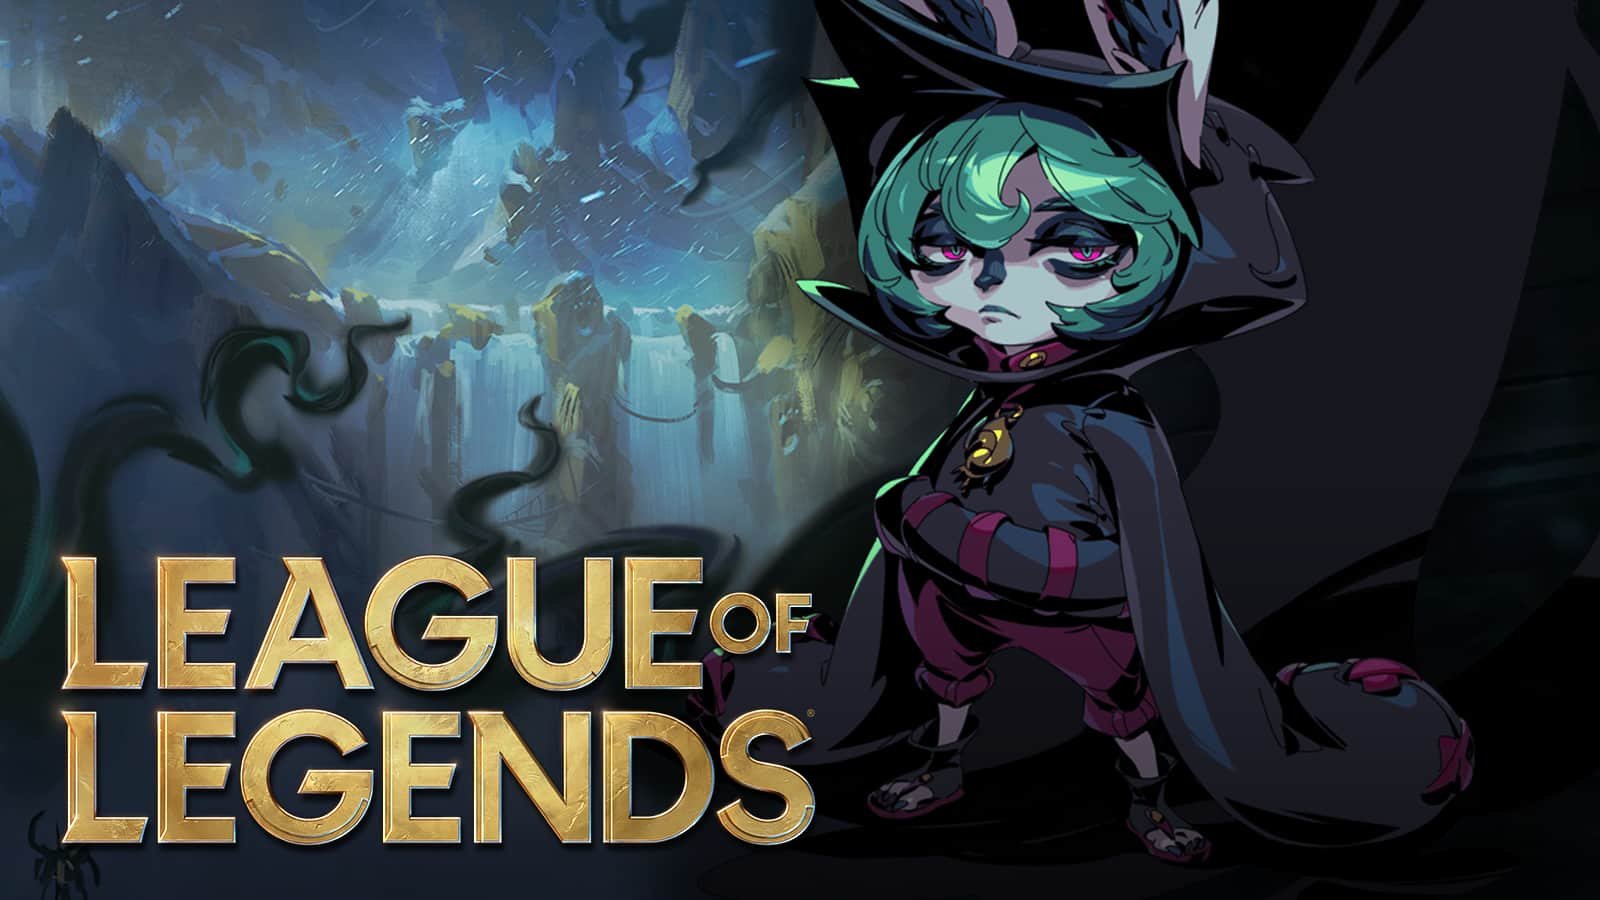 League of Legends new champion is Akshan, abilities and lore revealed